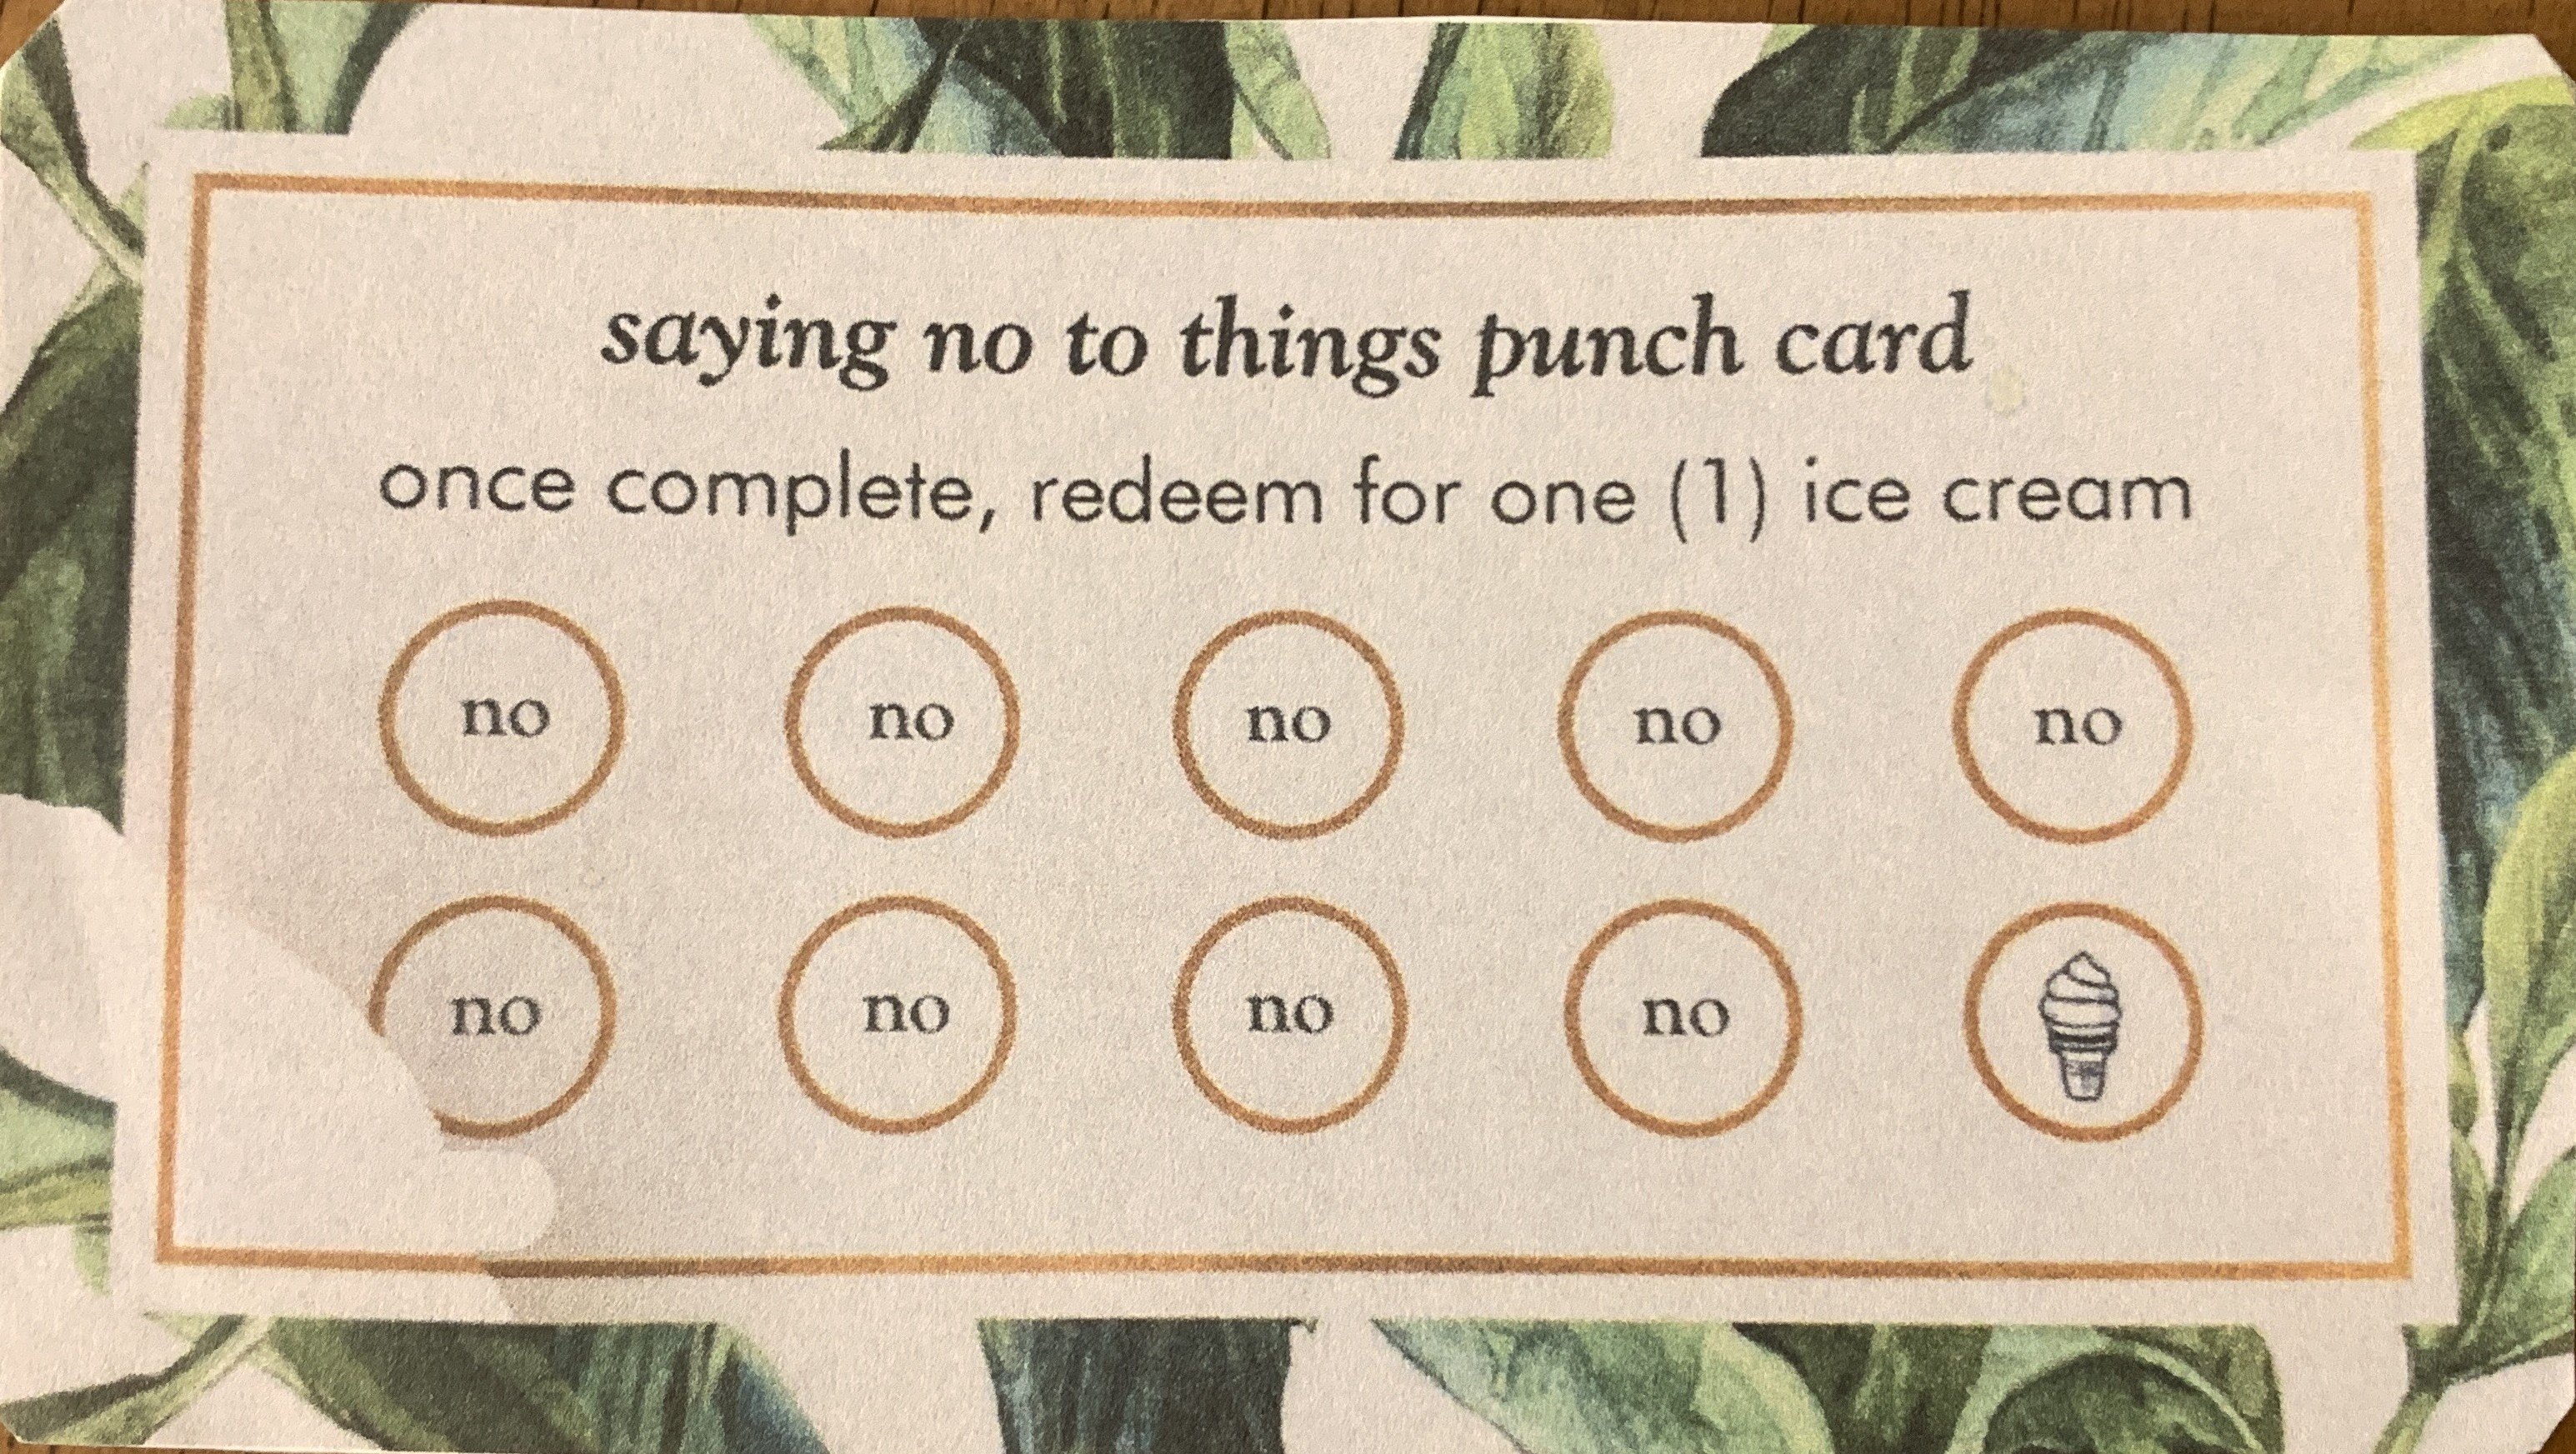 Photo of a novelty loyalty card granting an ice cream if the carrier says "no" to ten things.